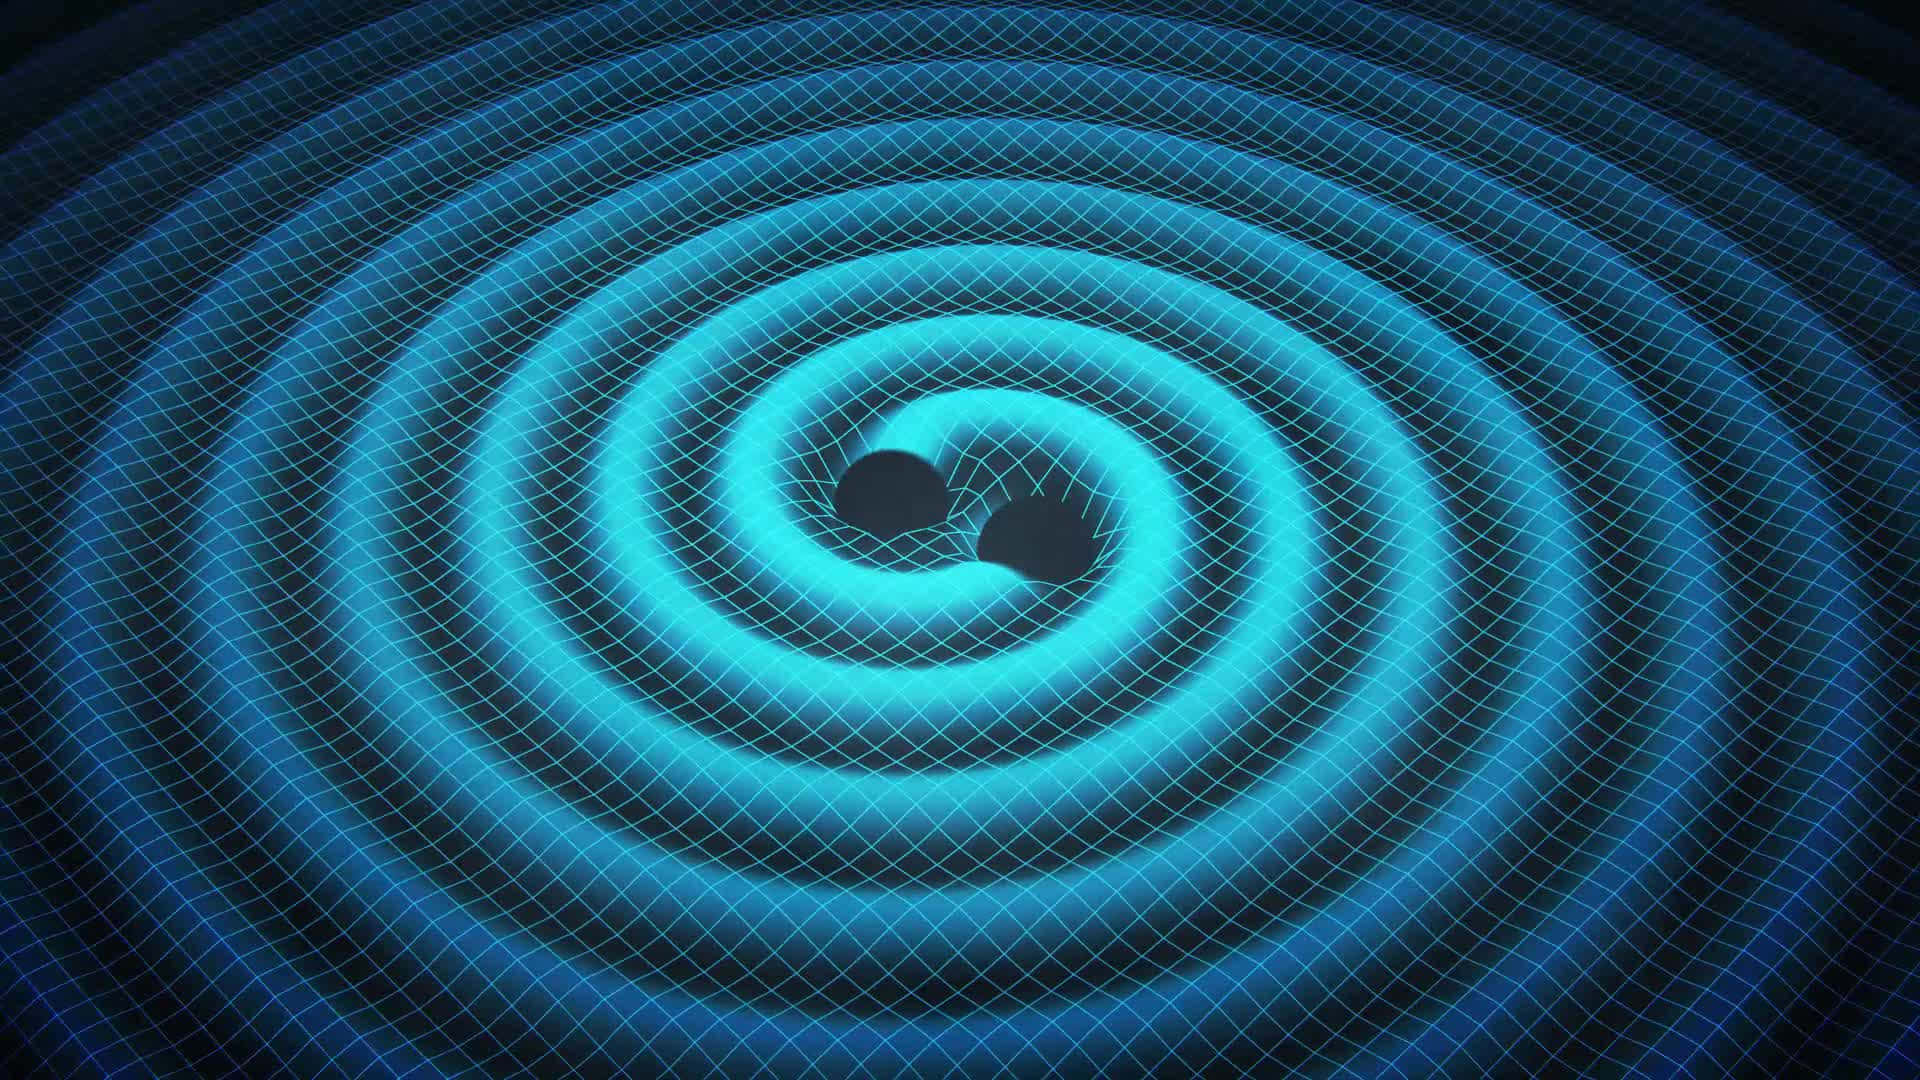 Gravitational Waves in Space-Time Fabric Wallpaper